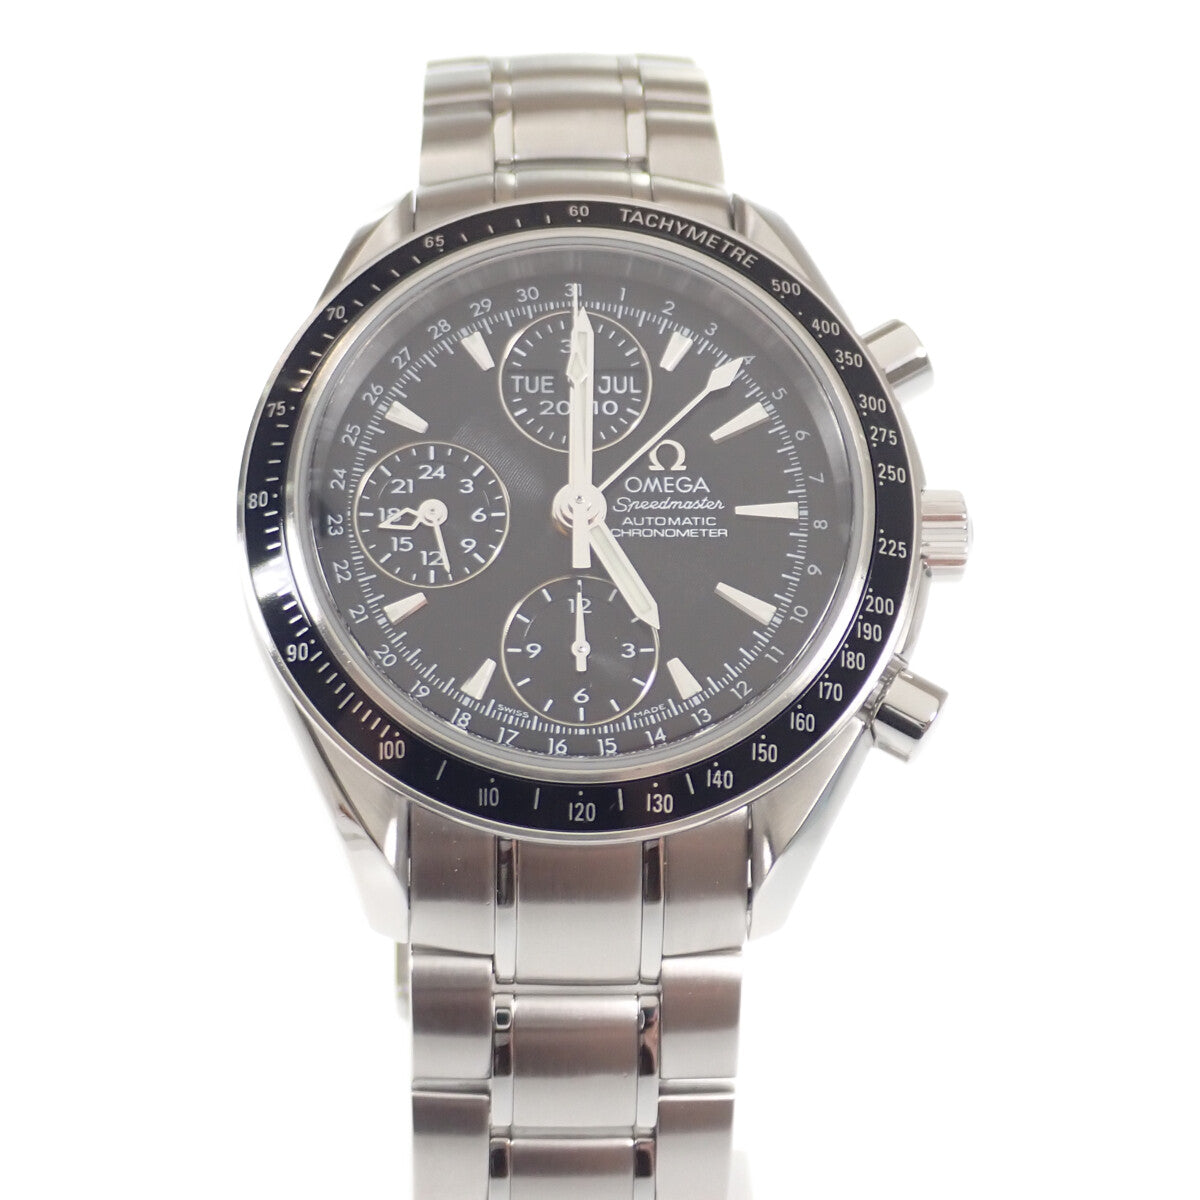 Omega Speedmaster Day-Date Triple Calendar Stainless Steel Men's Watch with Black Dial 3220.5